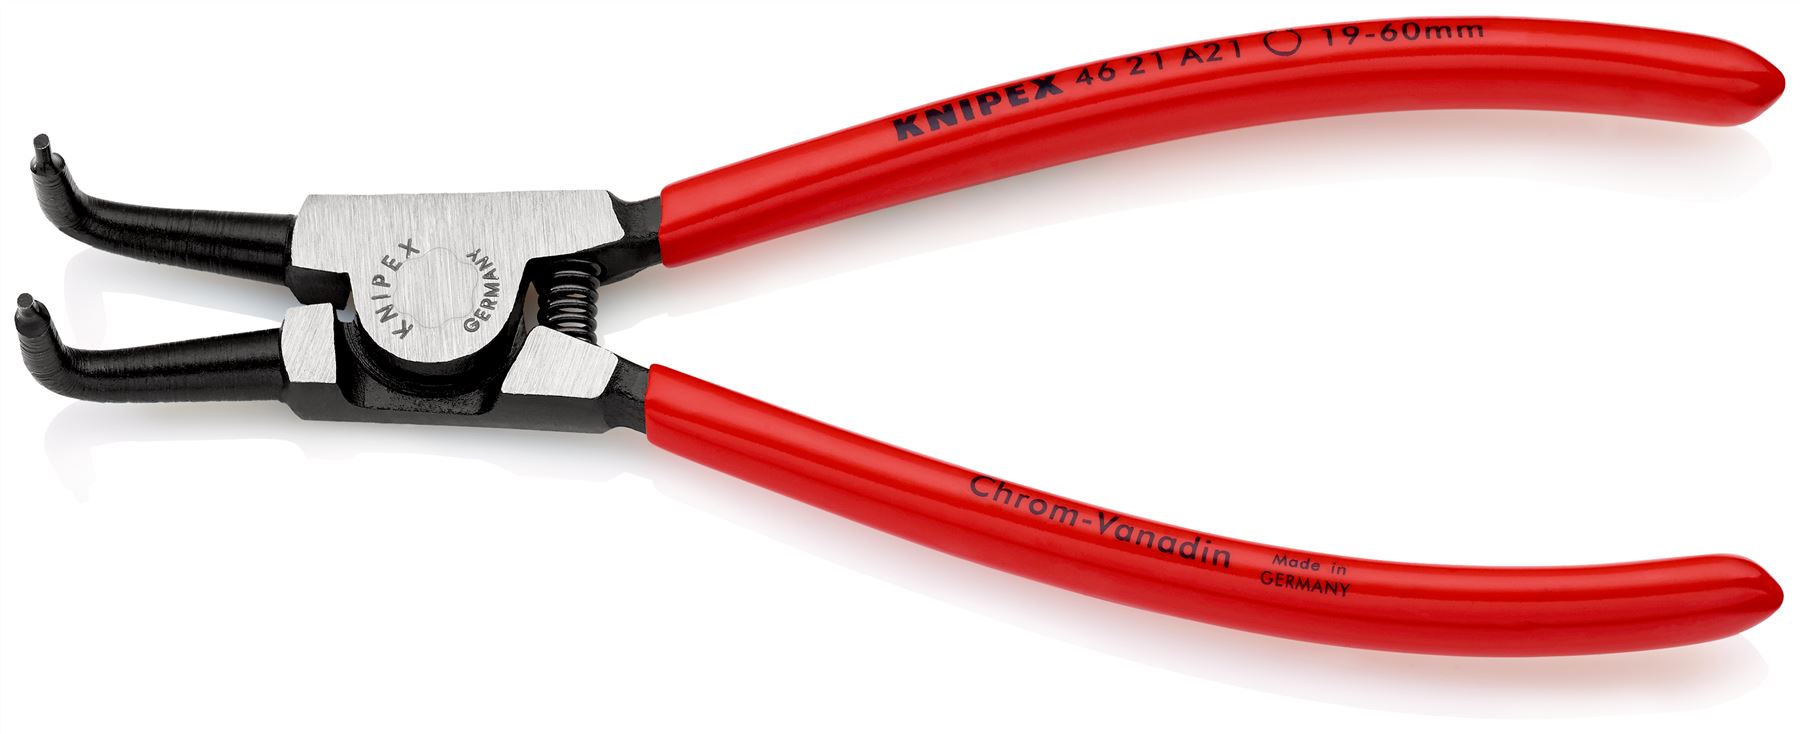 KNIPEX Circlip Pliers for External Circlips on Shafts 90° Angled 170mm 1.8mm Diameter Tips 46 21 A21